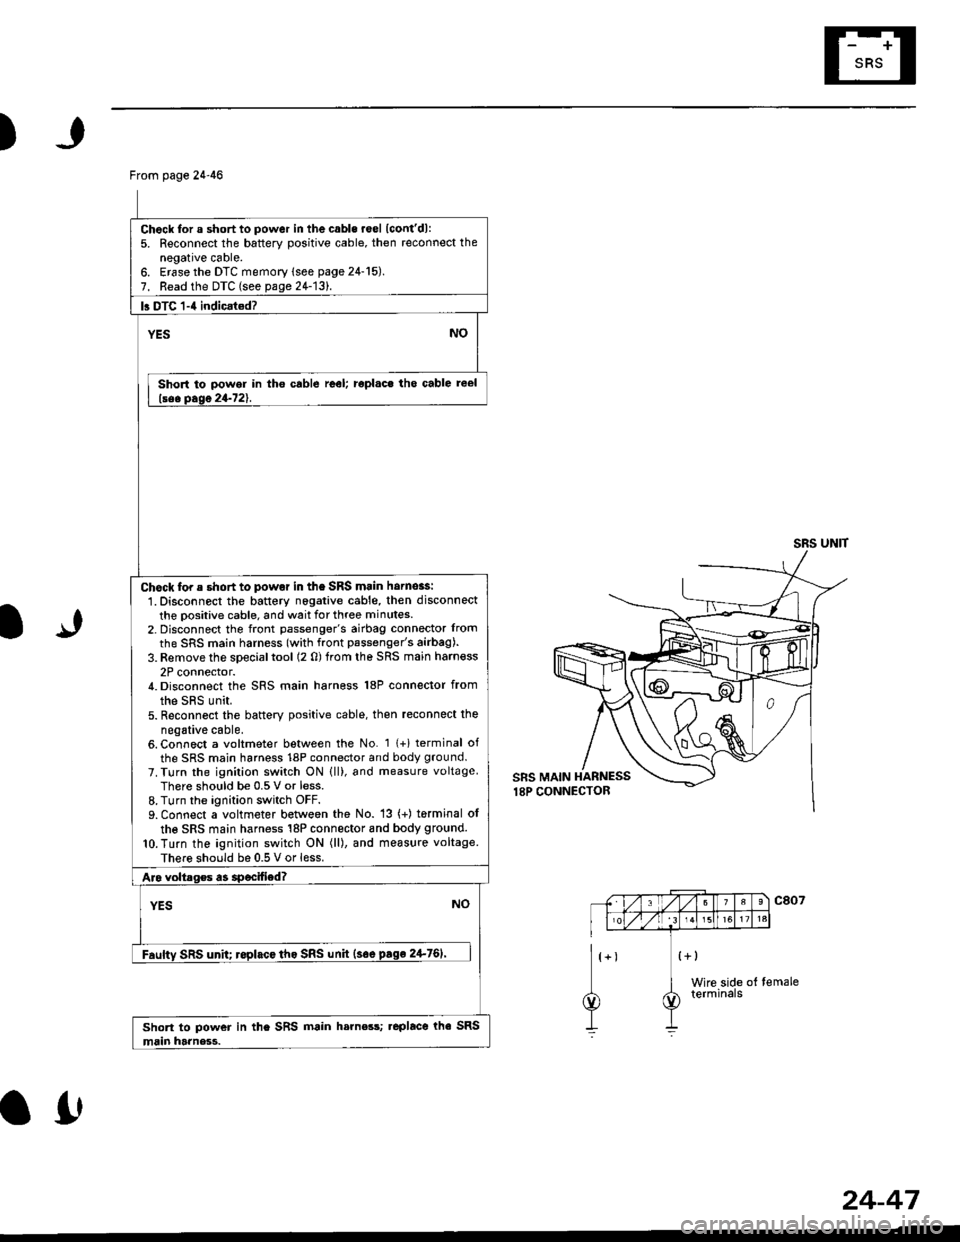 HONDA CIVIC 1996 6.G Service Manual )
From page 24-46
Chock for a short to power in the cabls roel lcontdl:5. Reconnect the battery positive cable, then reconnect thenegative cable.6. Erase the DTC memory lsee page 24-15).7. Read the D